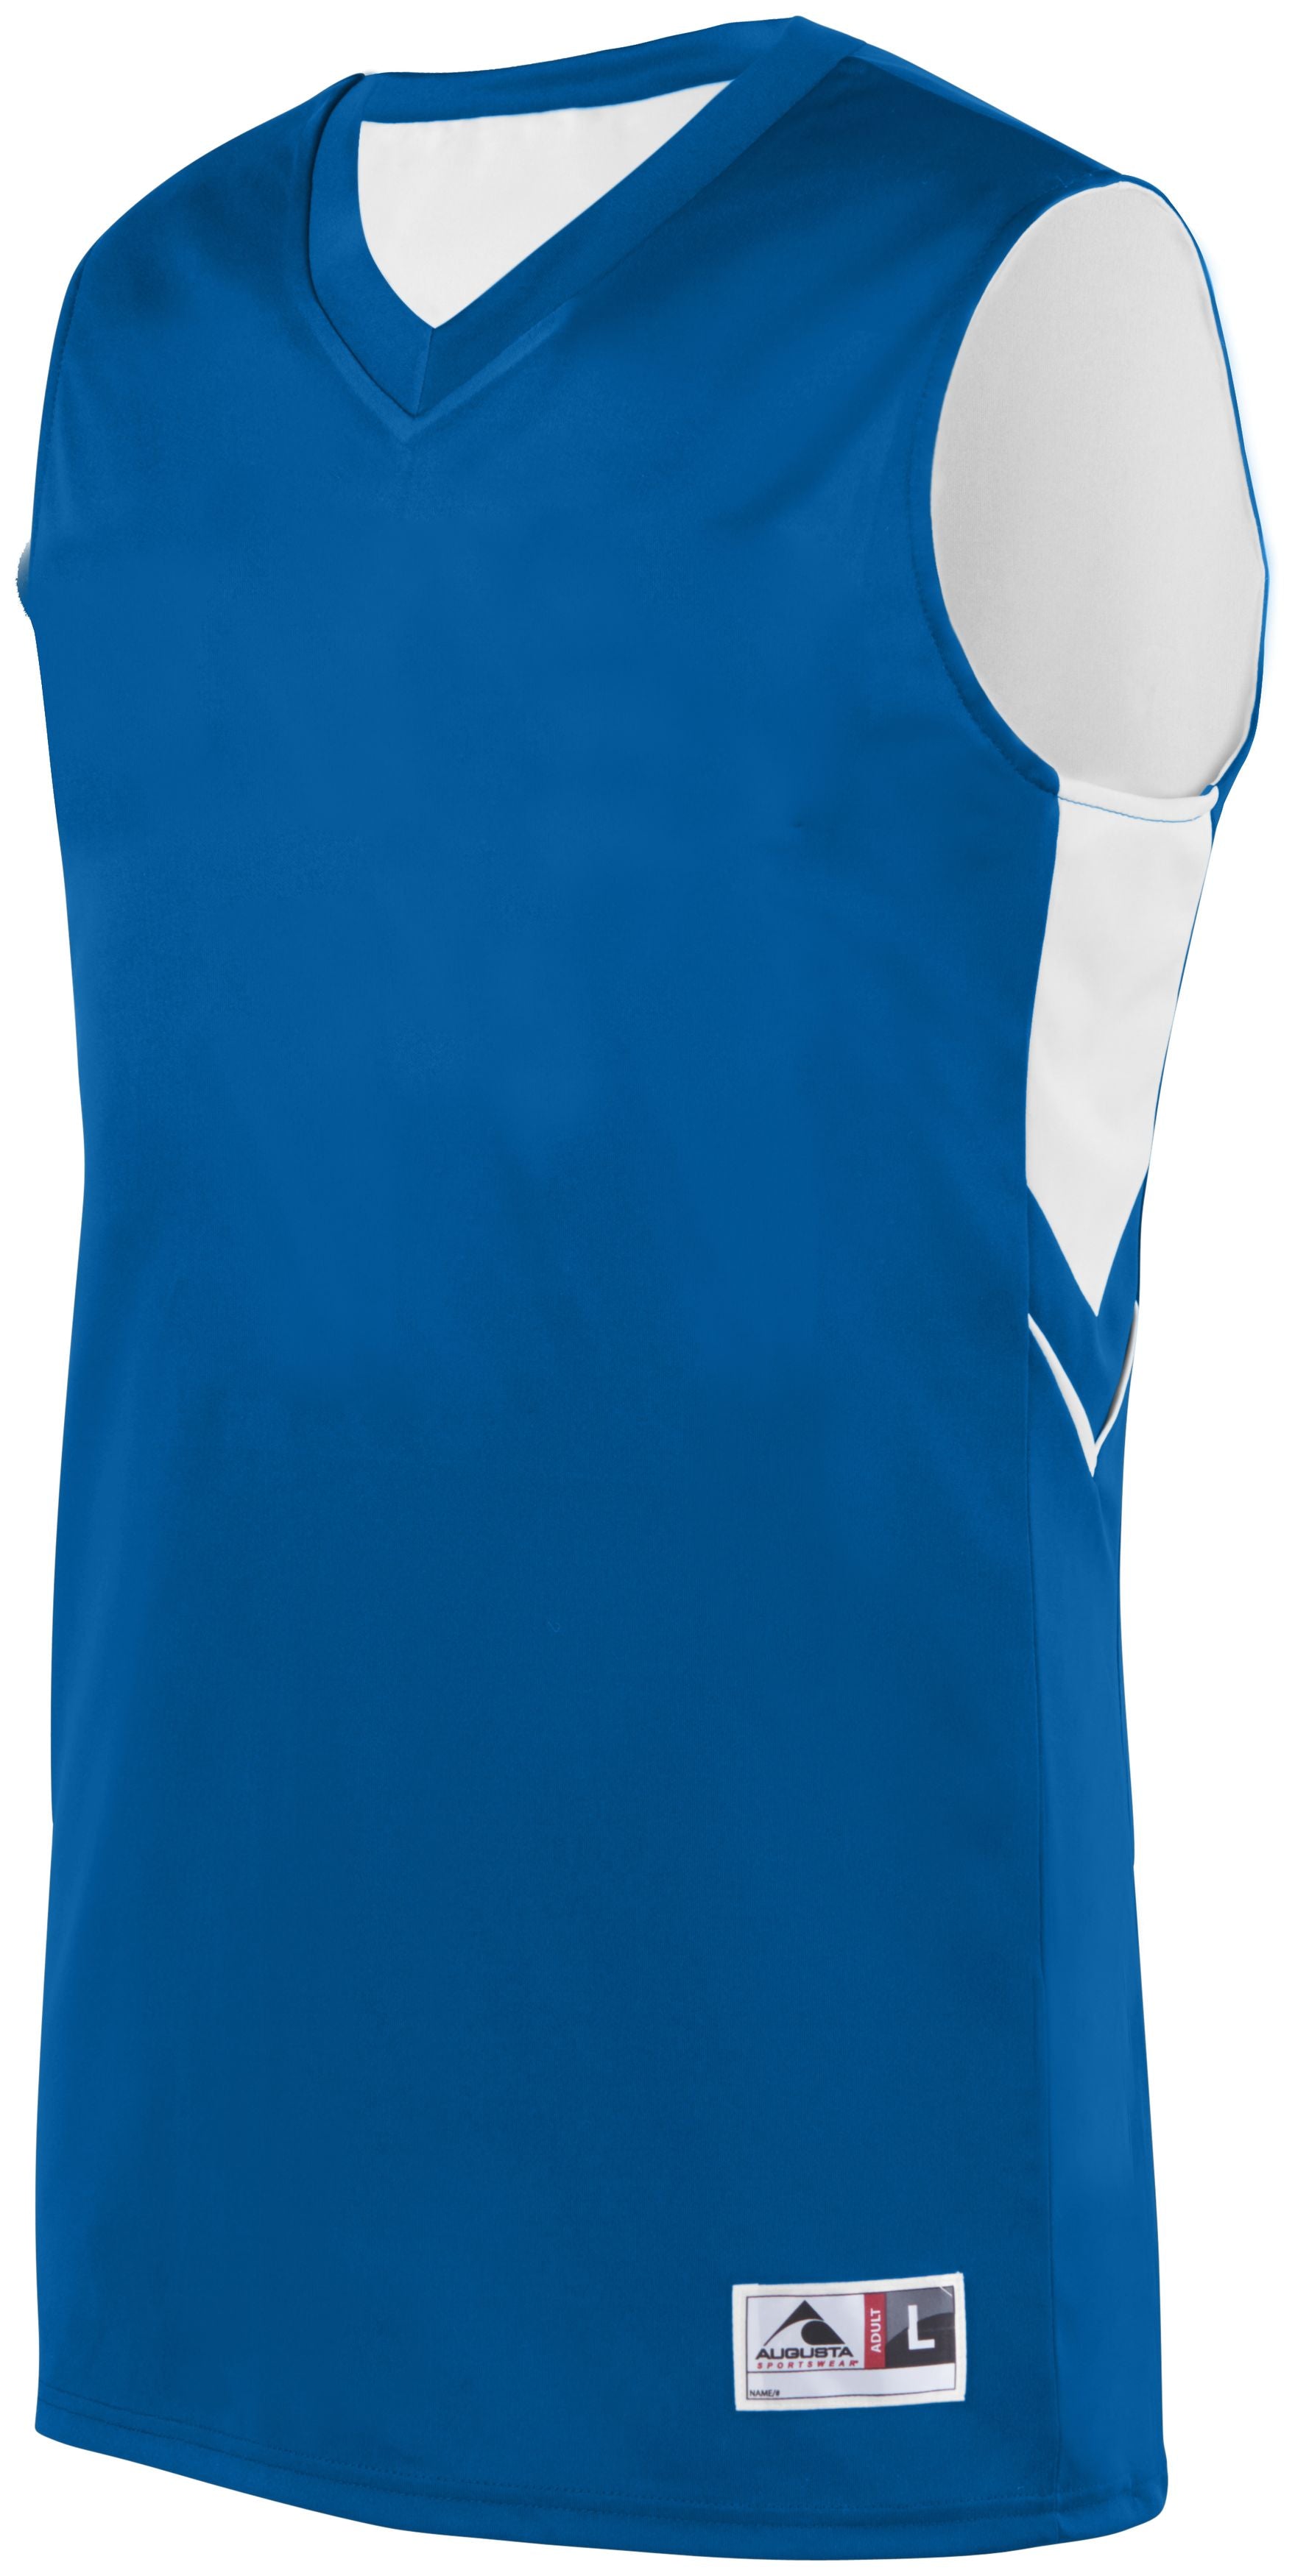 Augusta Sportswear Alley-Oop Reversible Jersey in Royal/White  -Part of the Adult, Adult-Jersey, Augusta-Products, Basketball, Shirts, All-Sports, All-Sports-1 product lines at KanaleyCreations.com